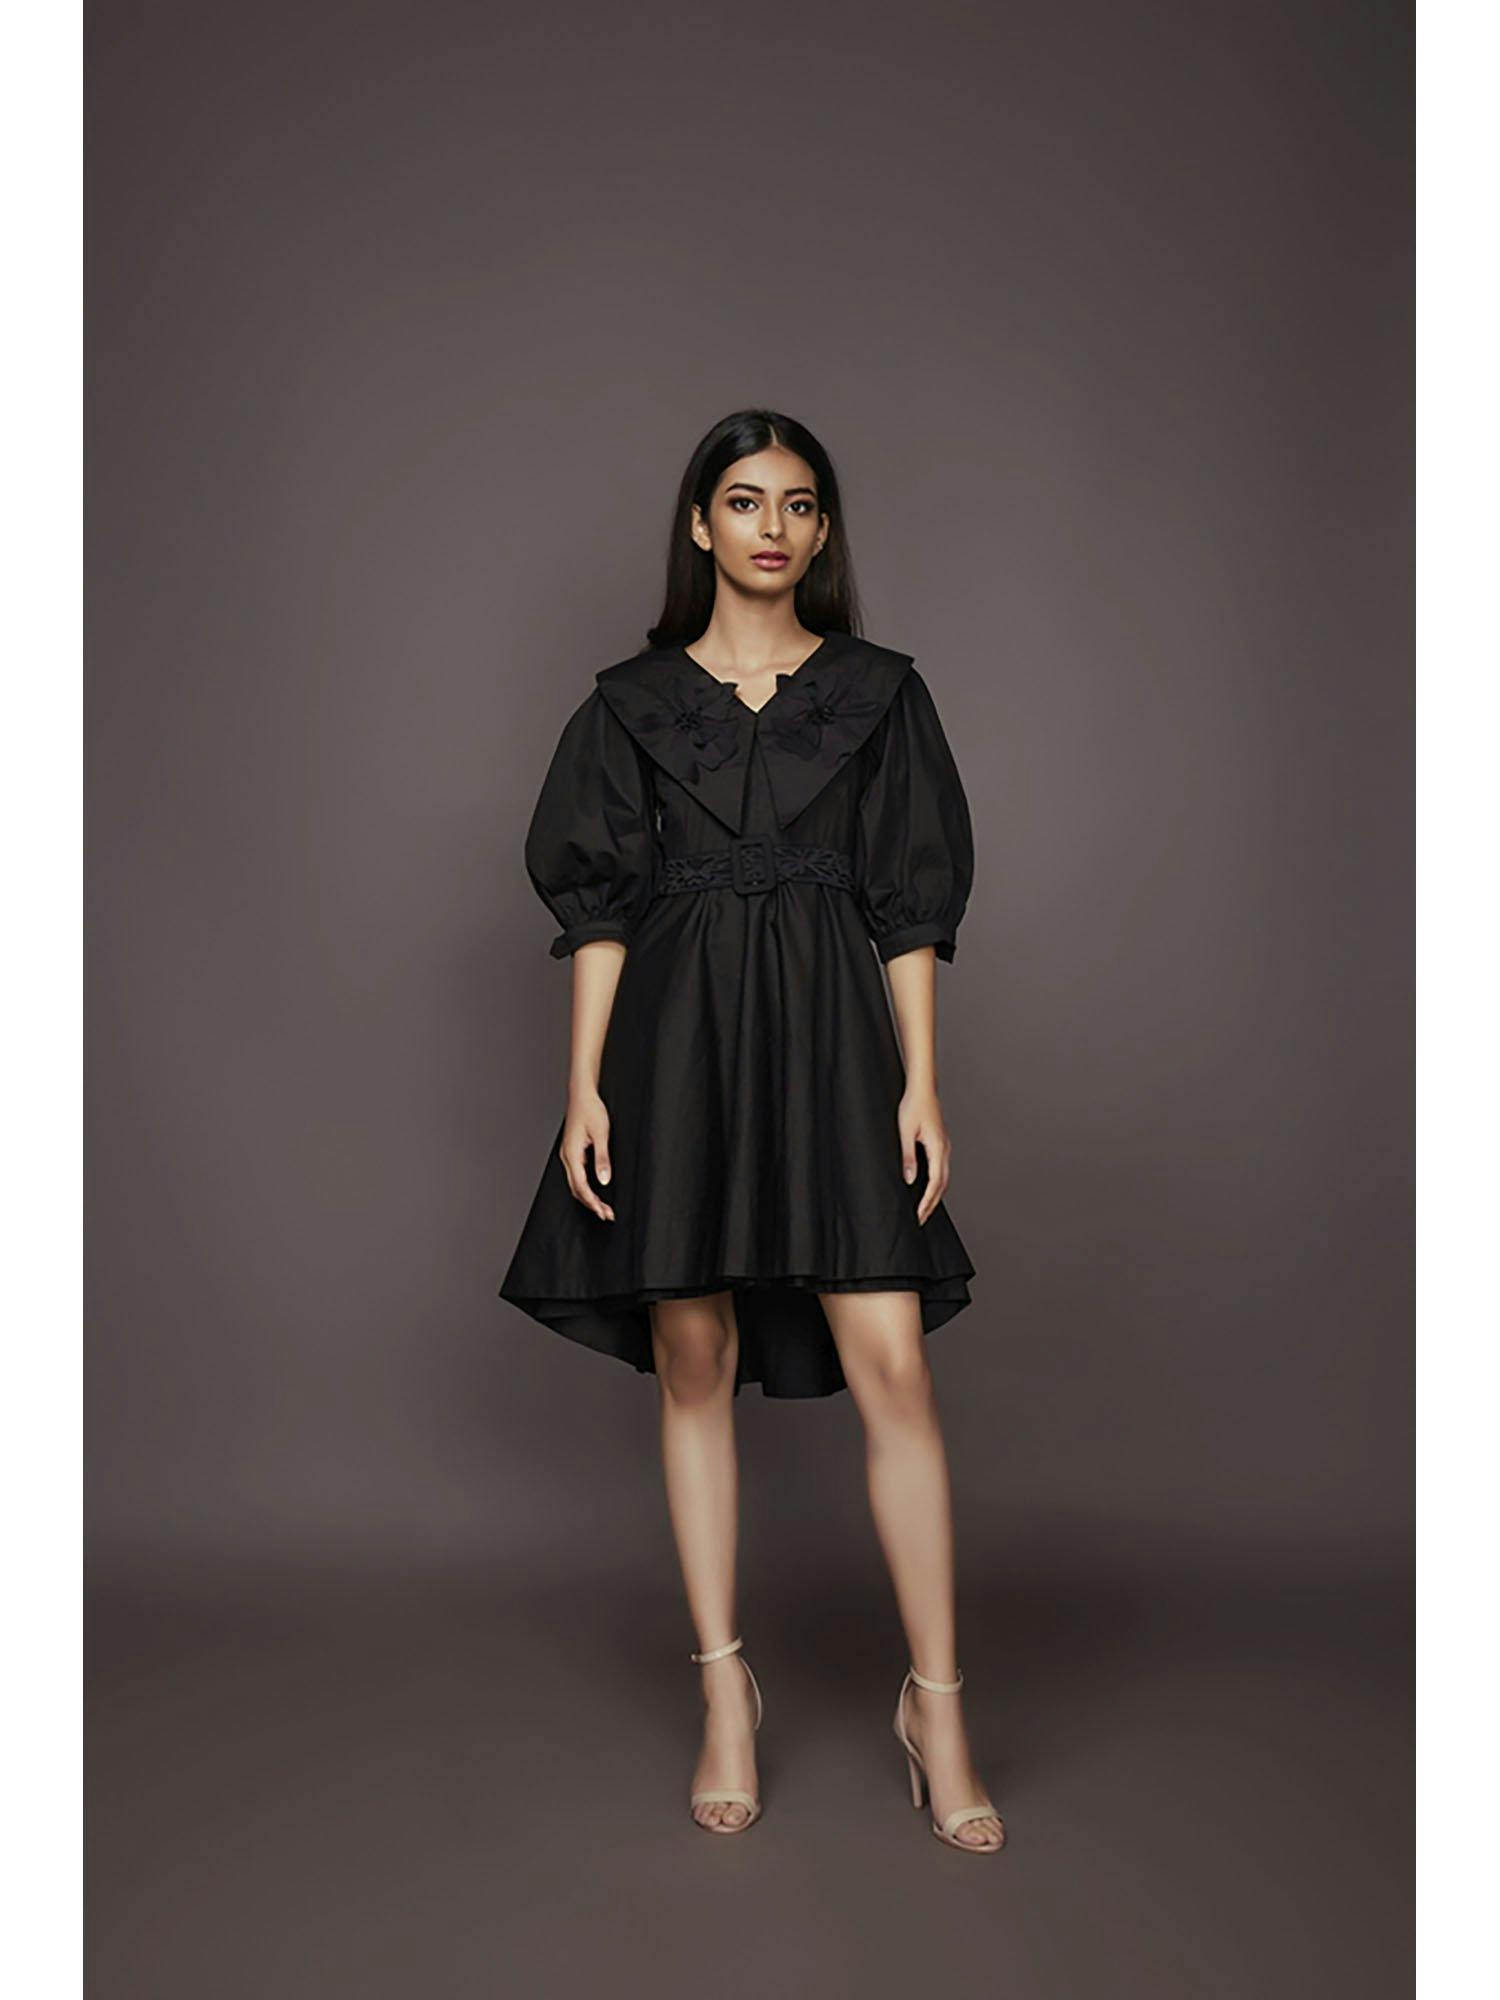 Black dress with attached collar and belt NN-1129, a product by Deepika Arora